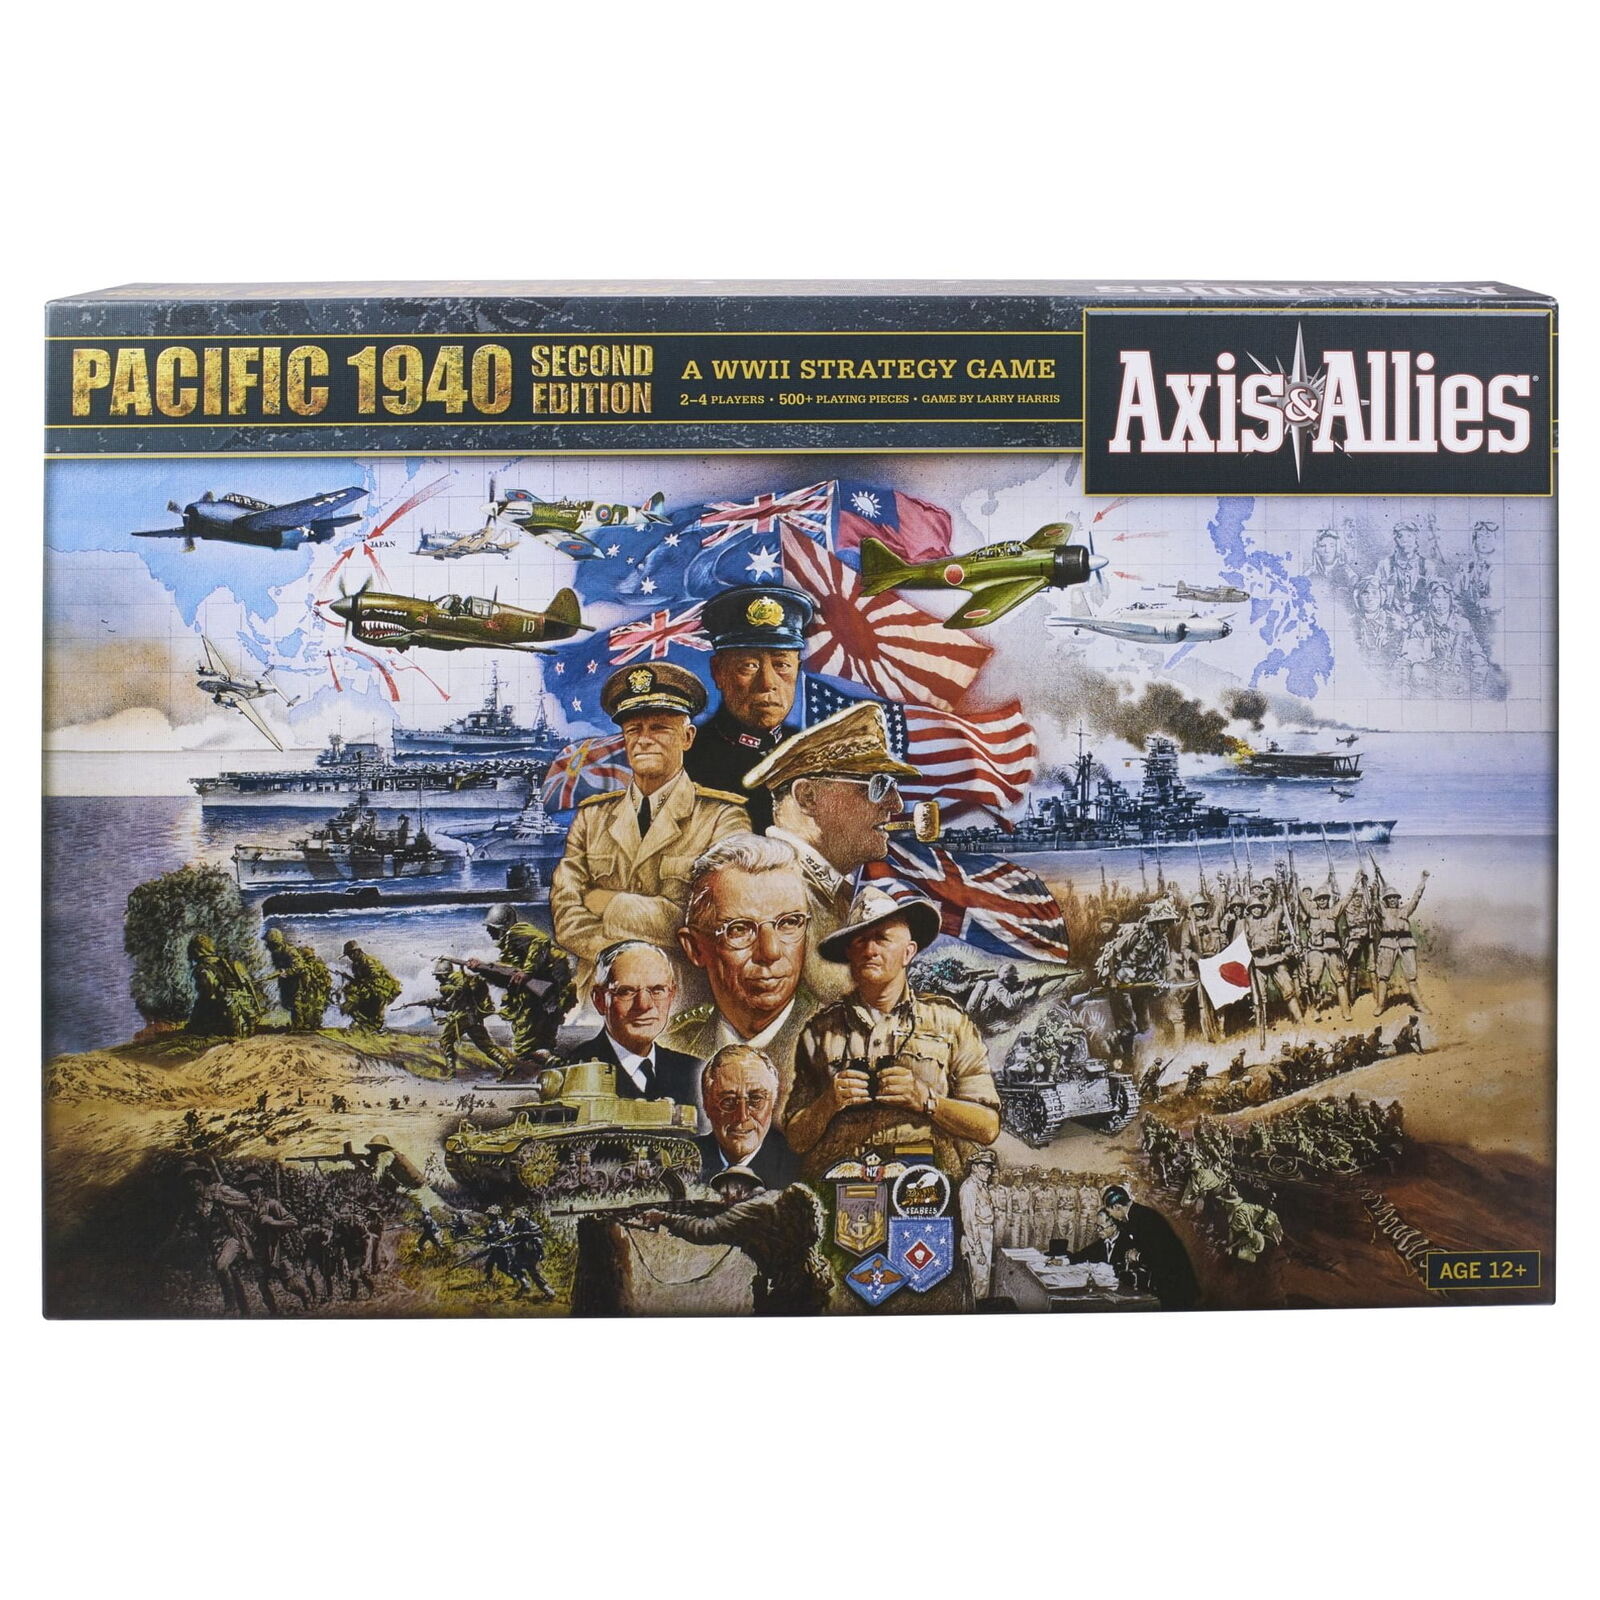 Axis & Allies Pacific 1940 WWII Strategy Board Game for Kids and Family Ages 12